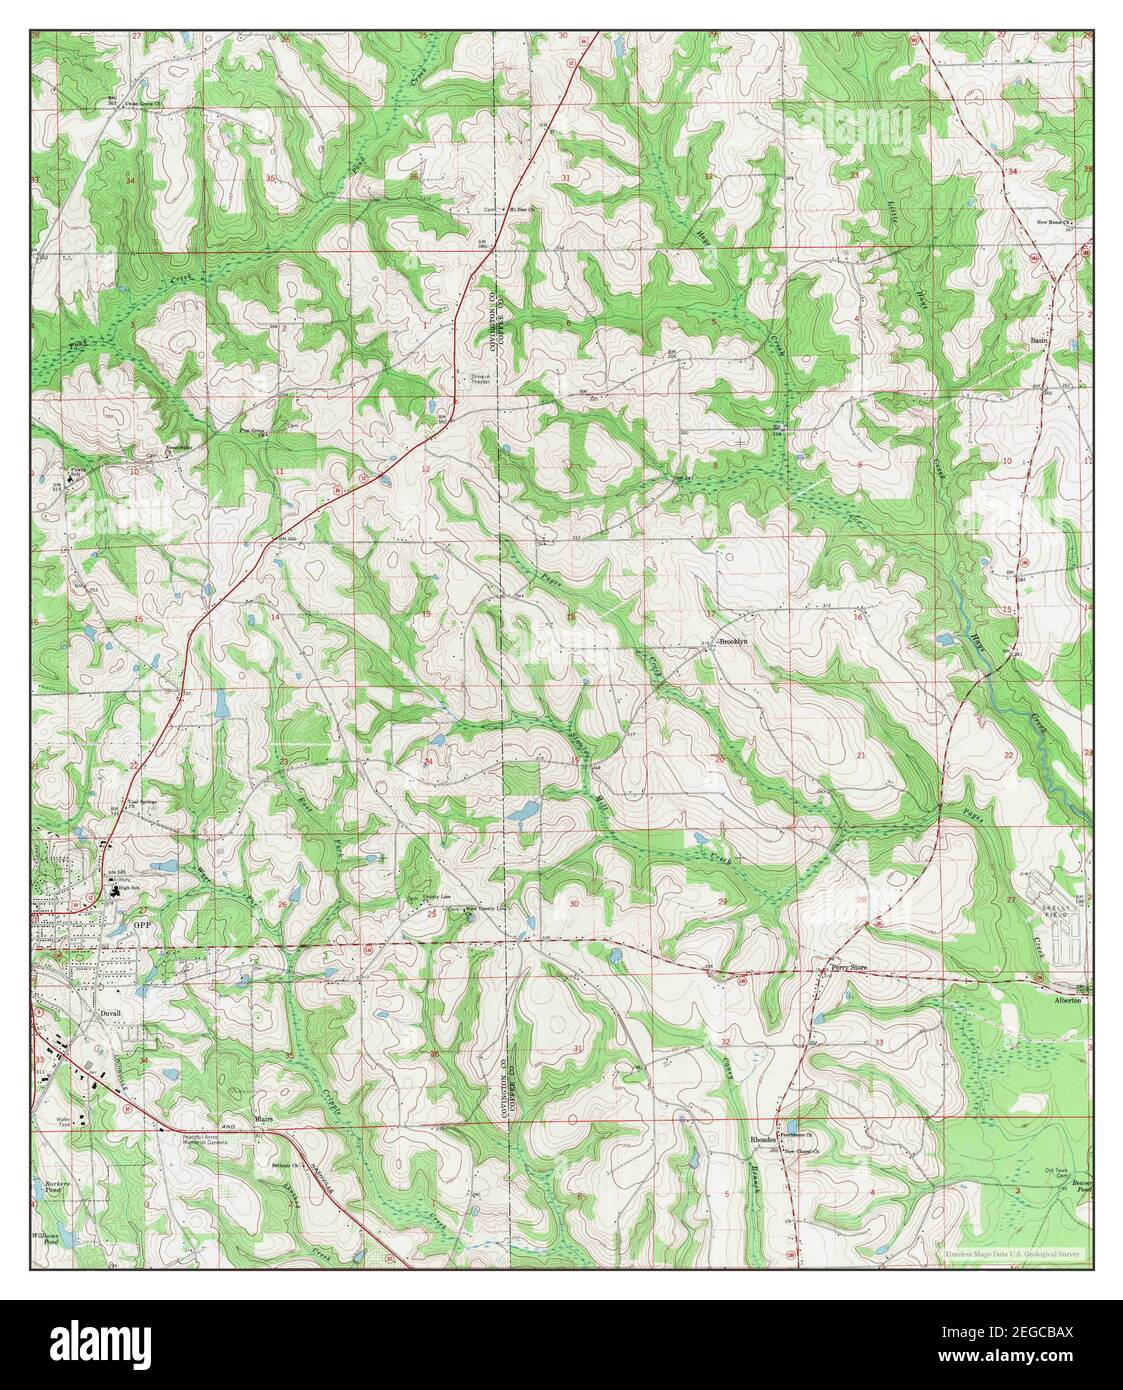 Opp East, Alabama, map 1968, 1:24000, United States of America by Timeless Maps, data U.S. Geological Survey Stock Photo